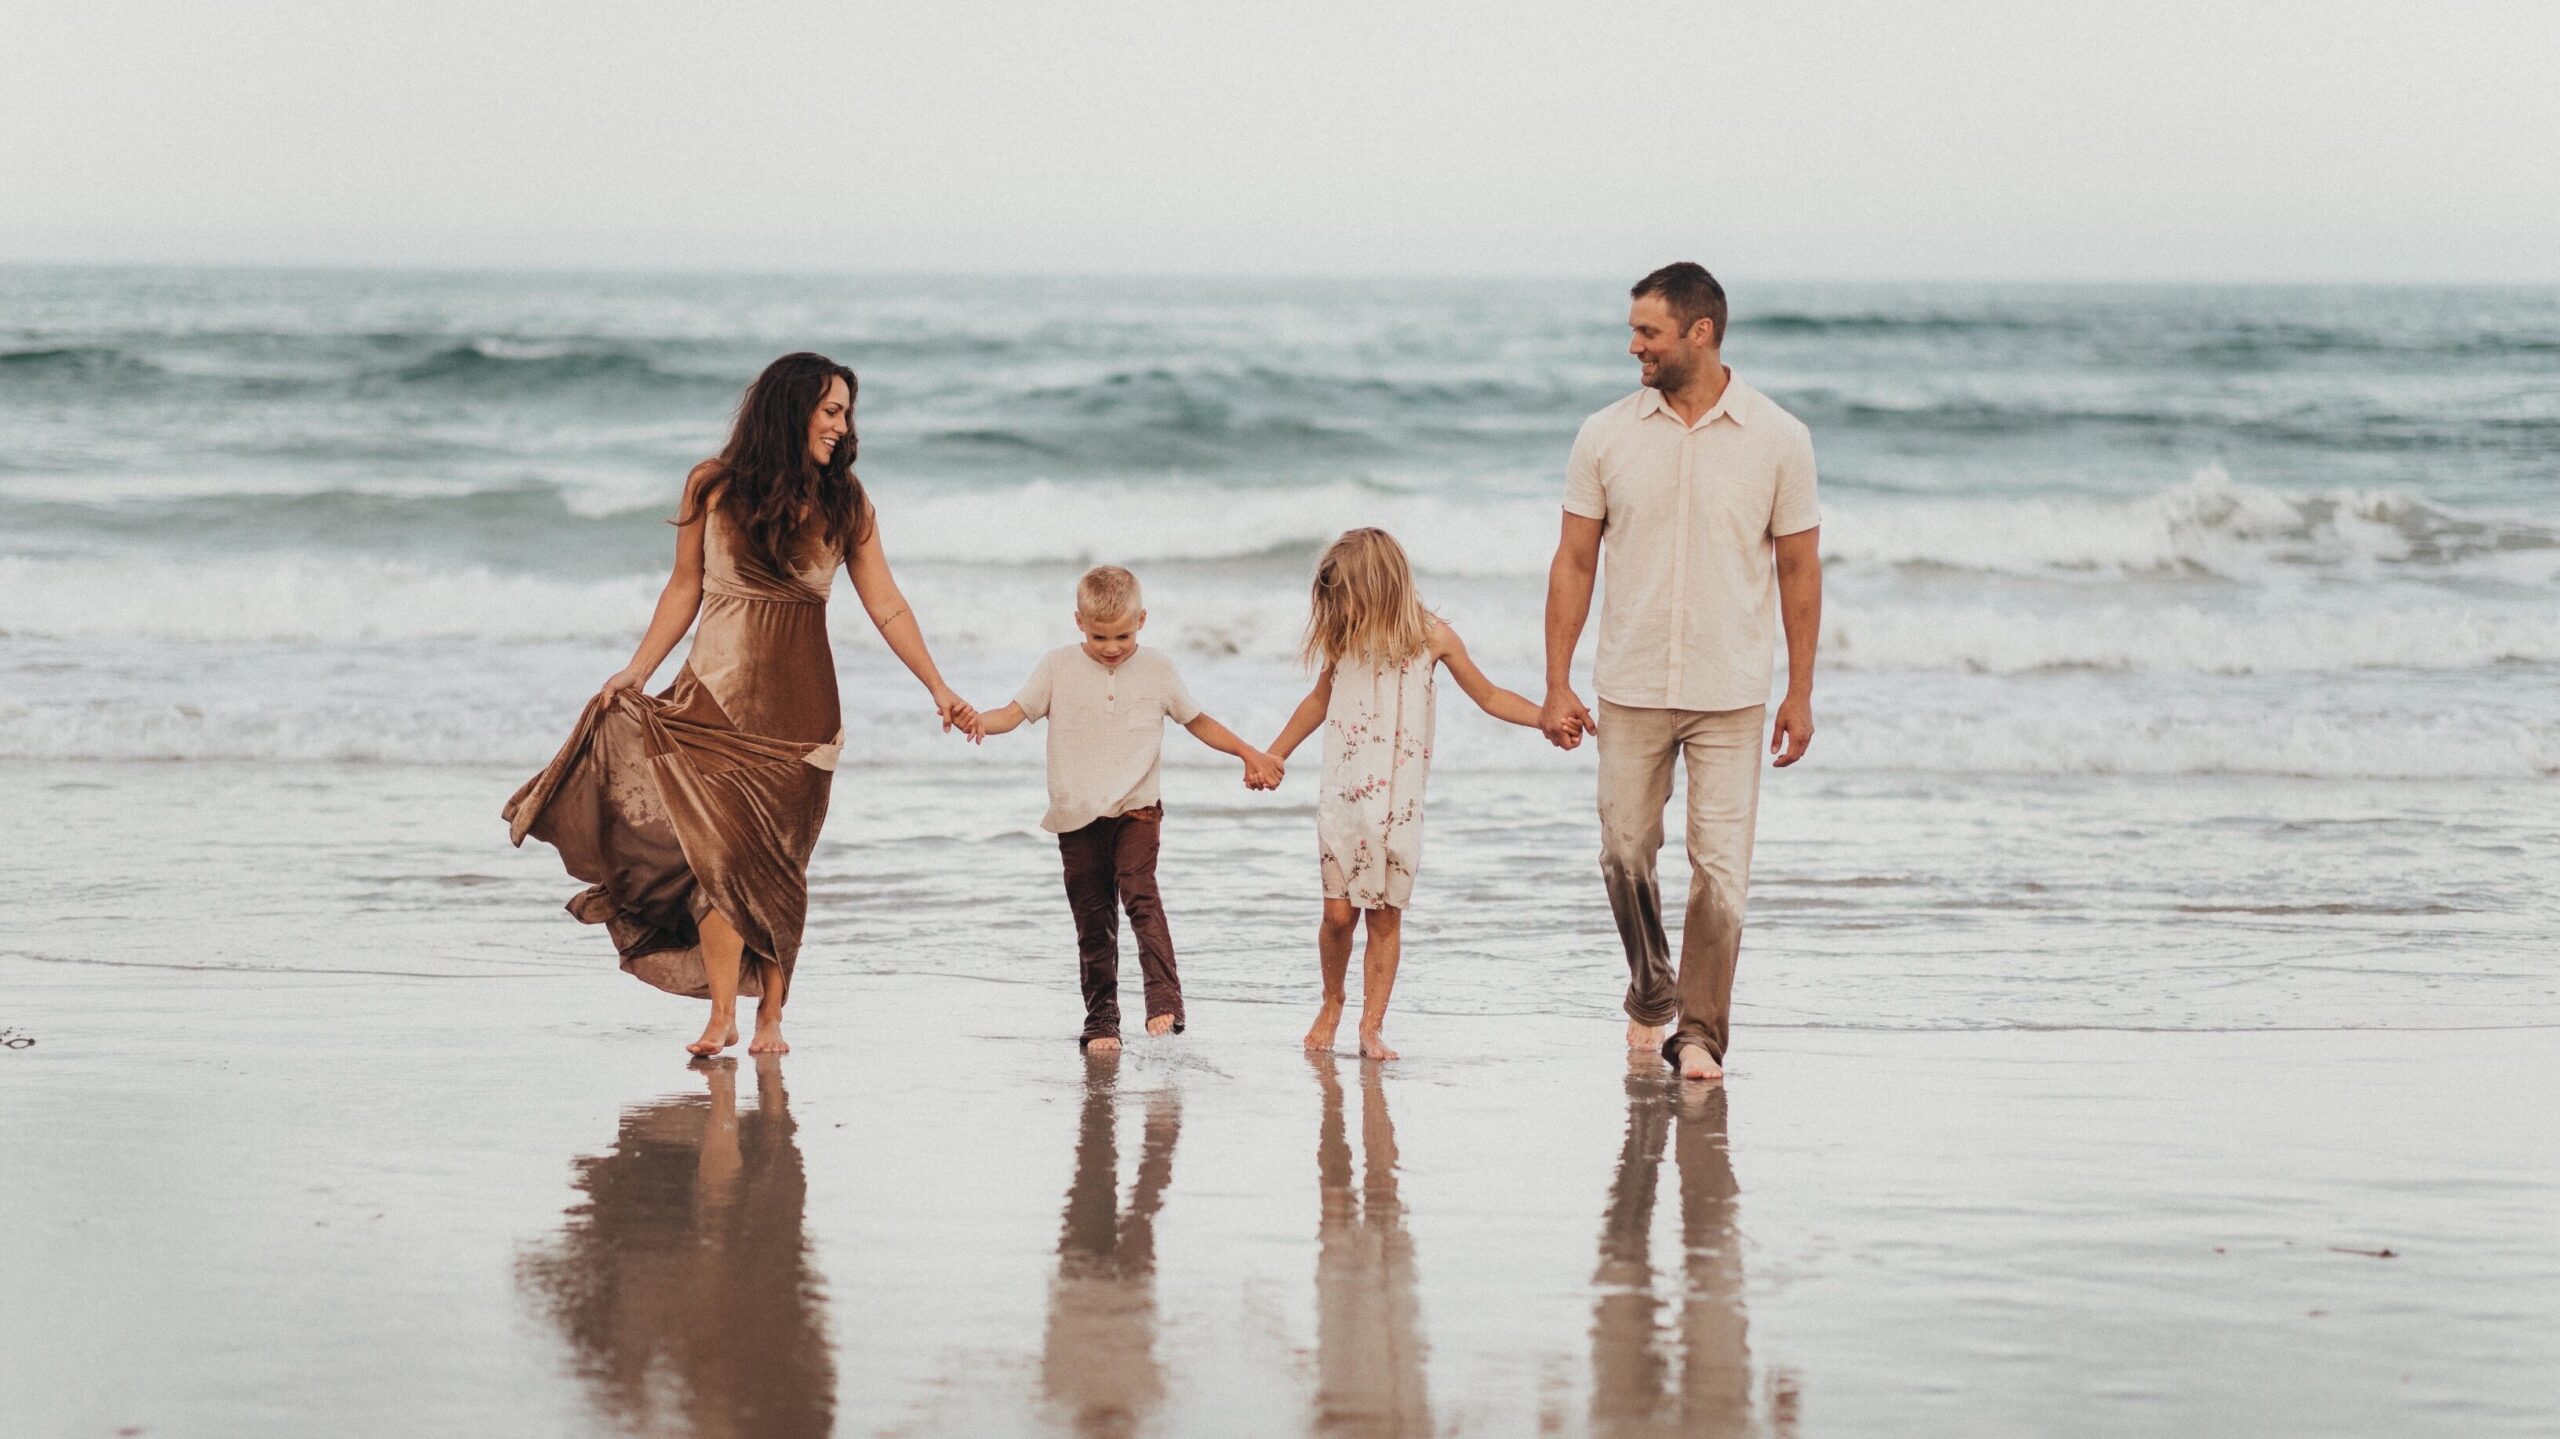         A Christian family walking on the beach holding hands.